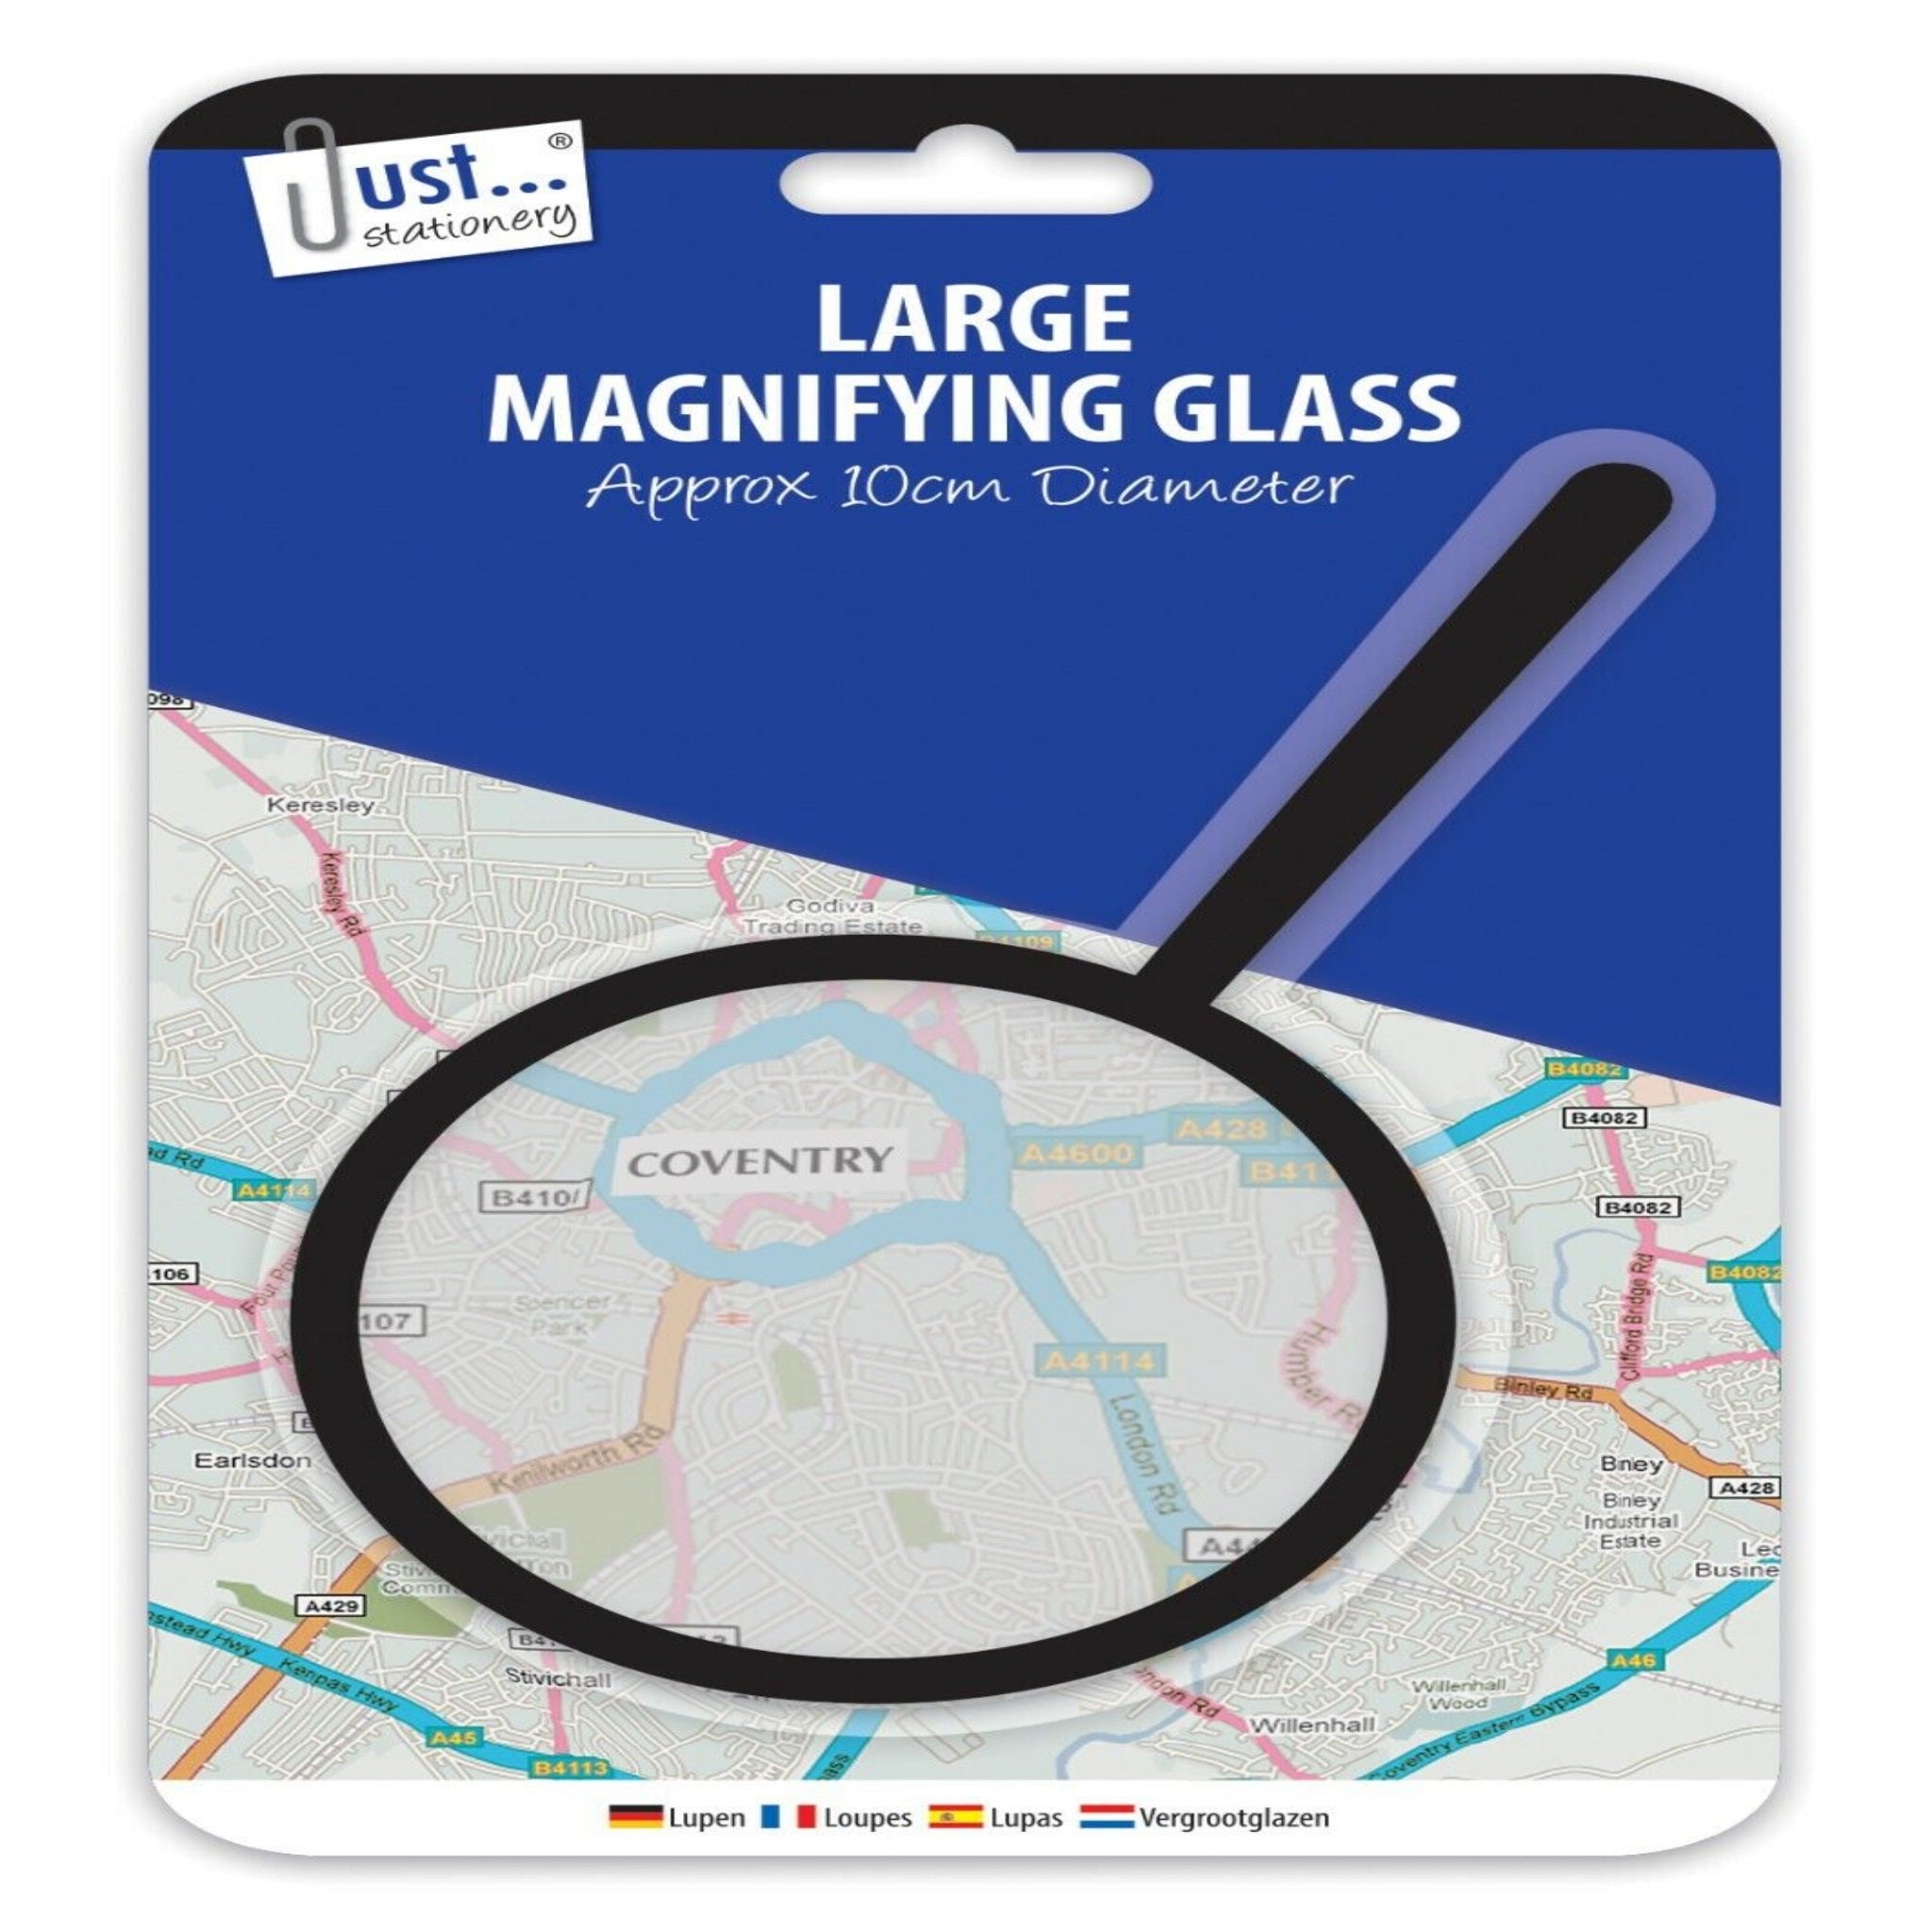 Beclen Harp Large Magnifying Glass 10cm for Hobby Observation Learning Reading Fault Finding Jewelry Modelling